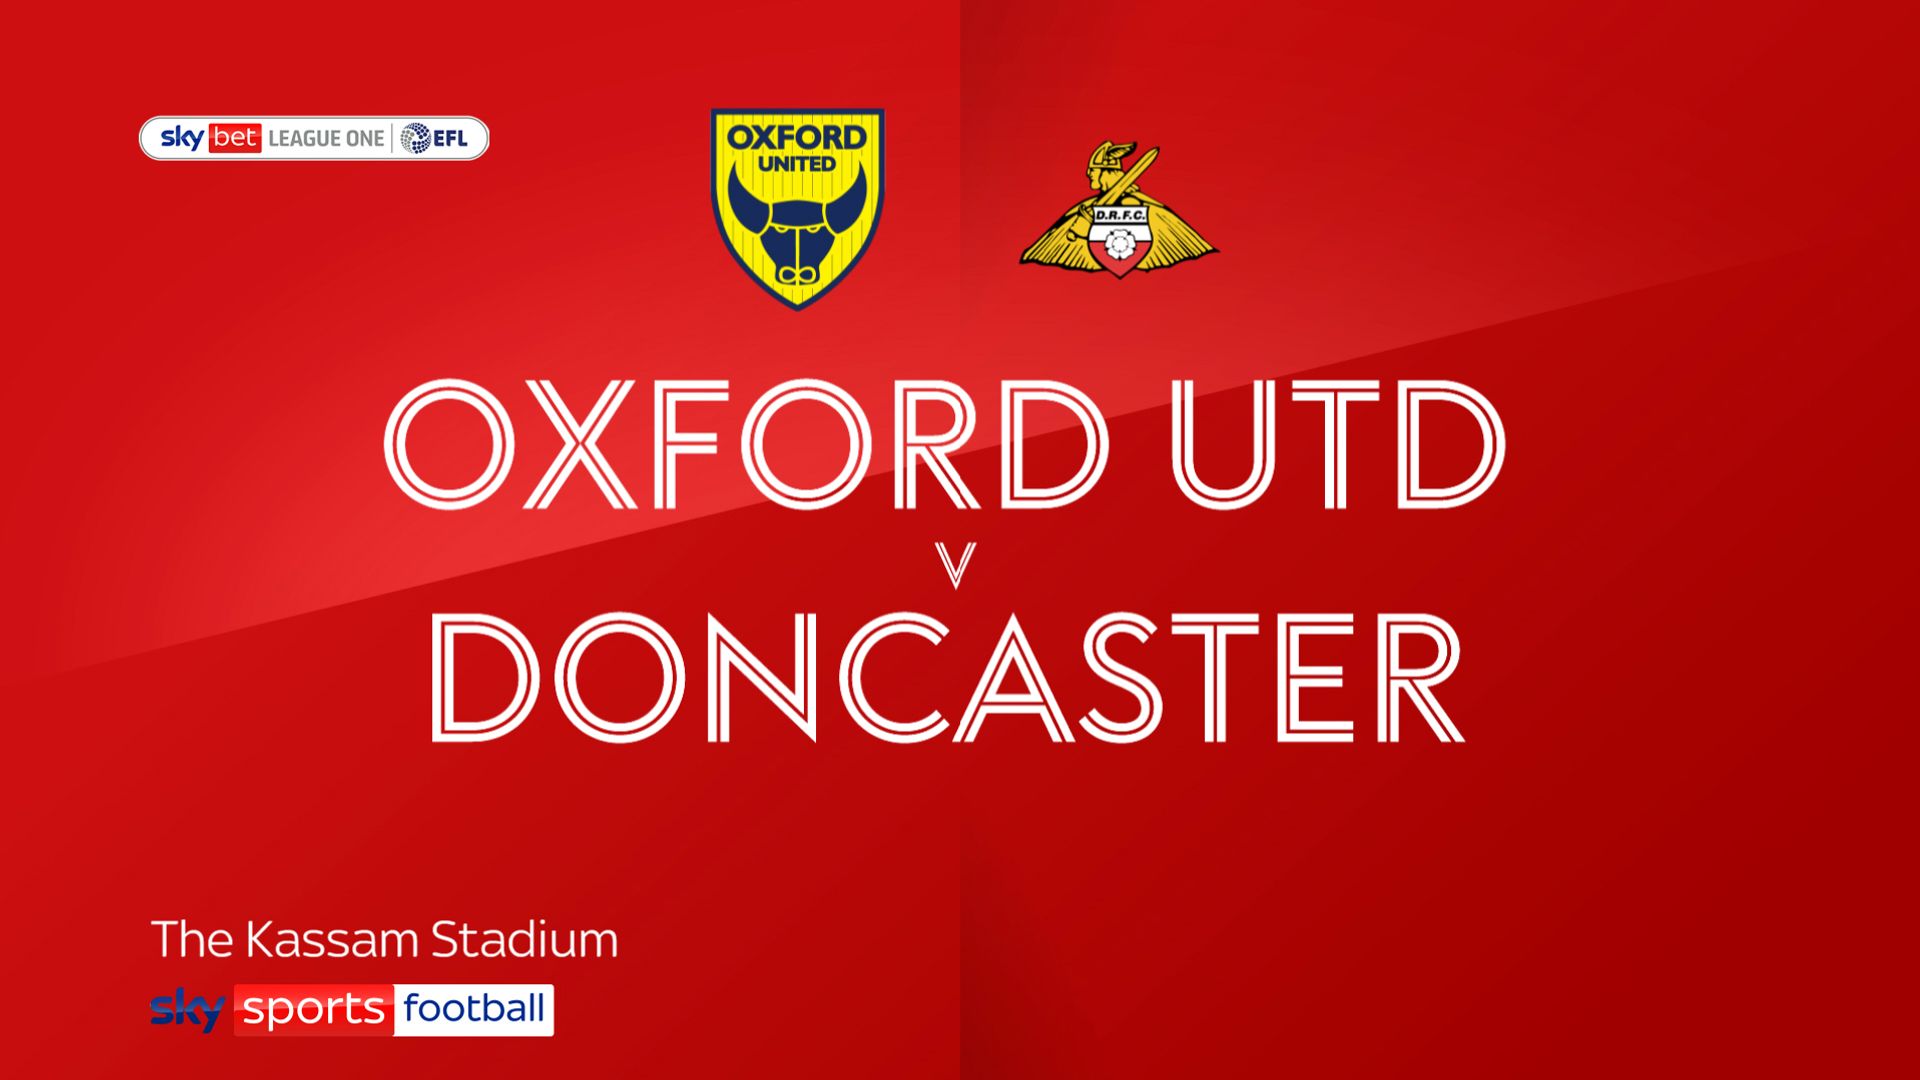 Doncaster down after draw at Oxford